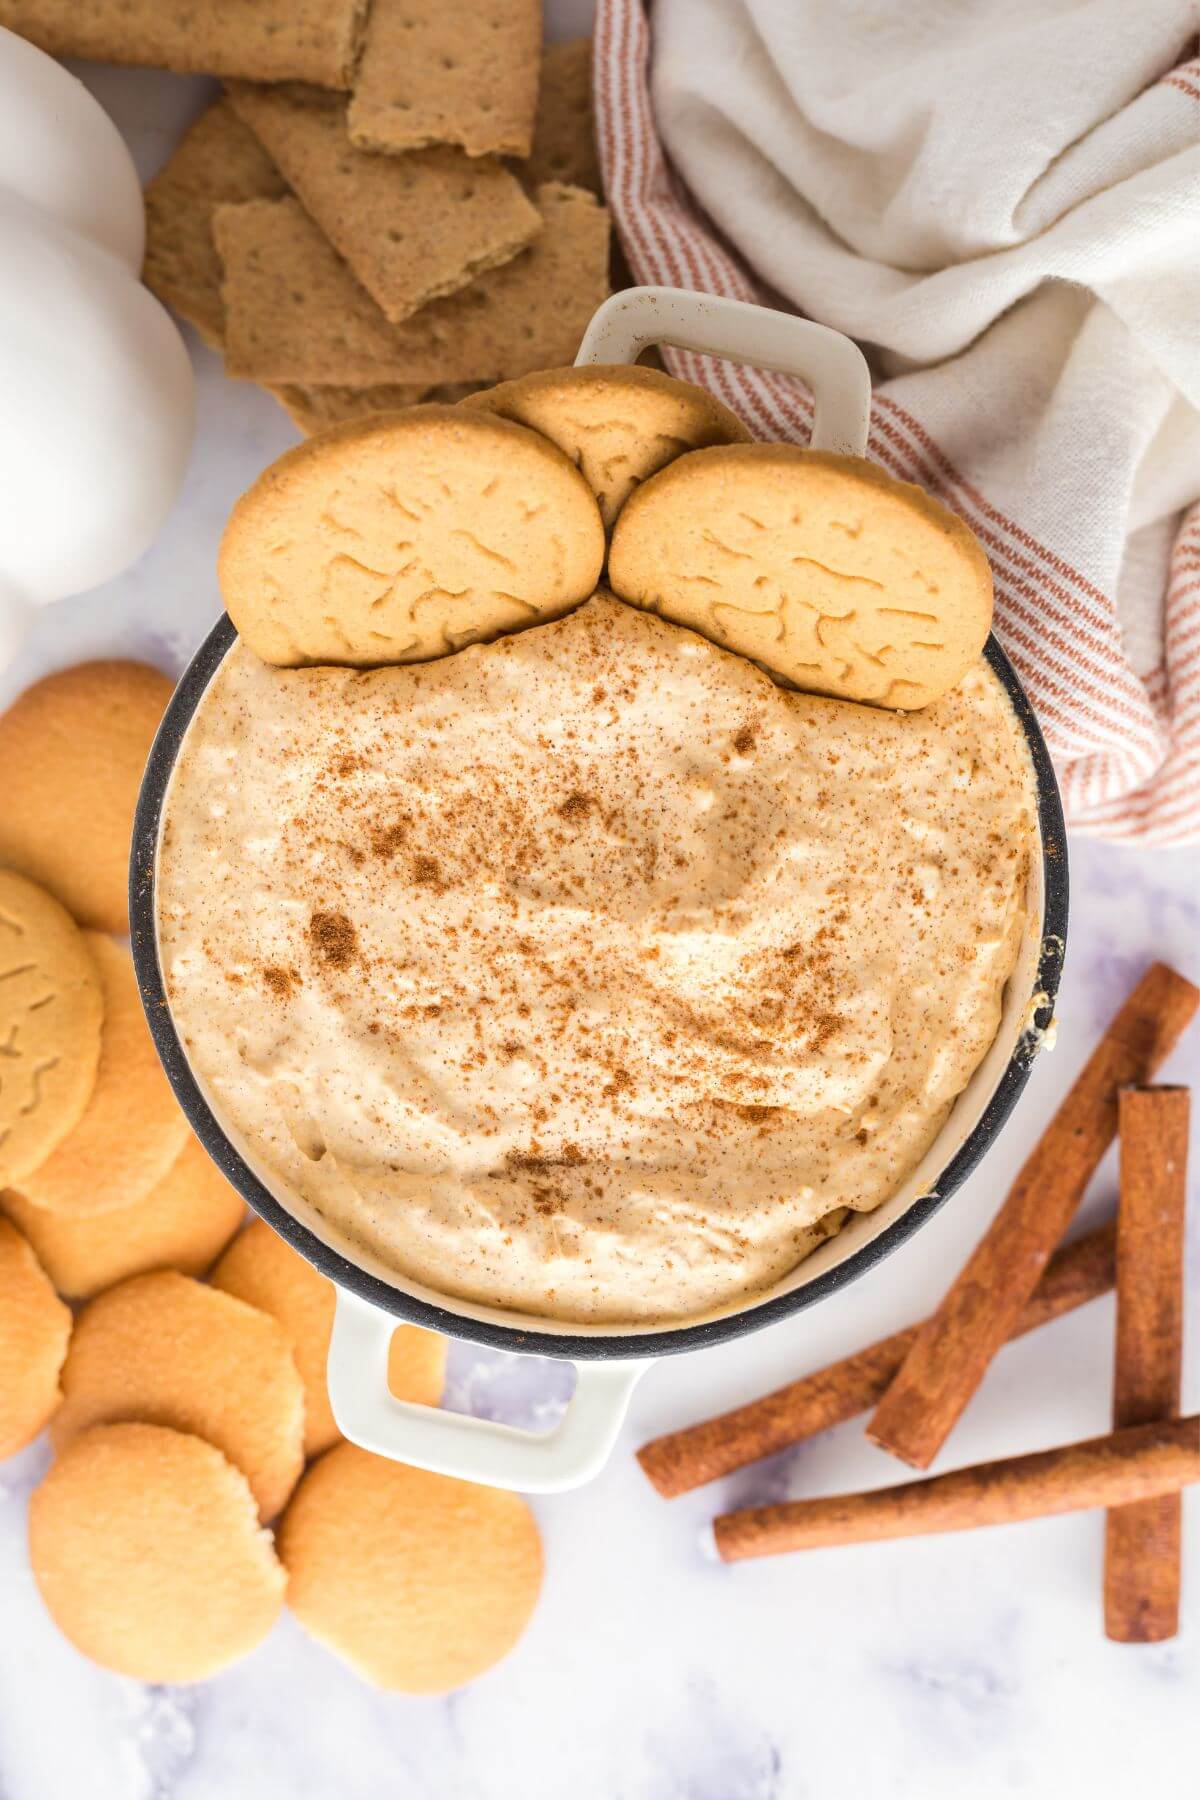 Pumpkin Fluff dip dessert with cookies artfully shown in dip and surrounding the bowl along with cinnamon sticks, graham crackers, and decorations.